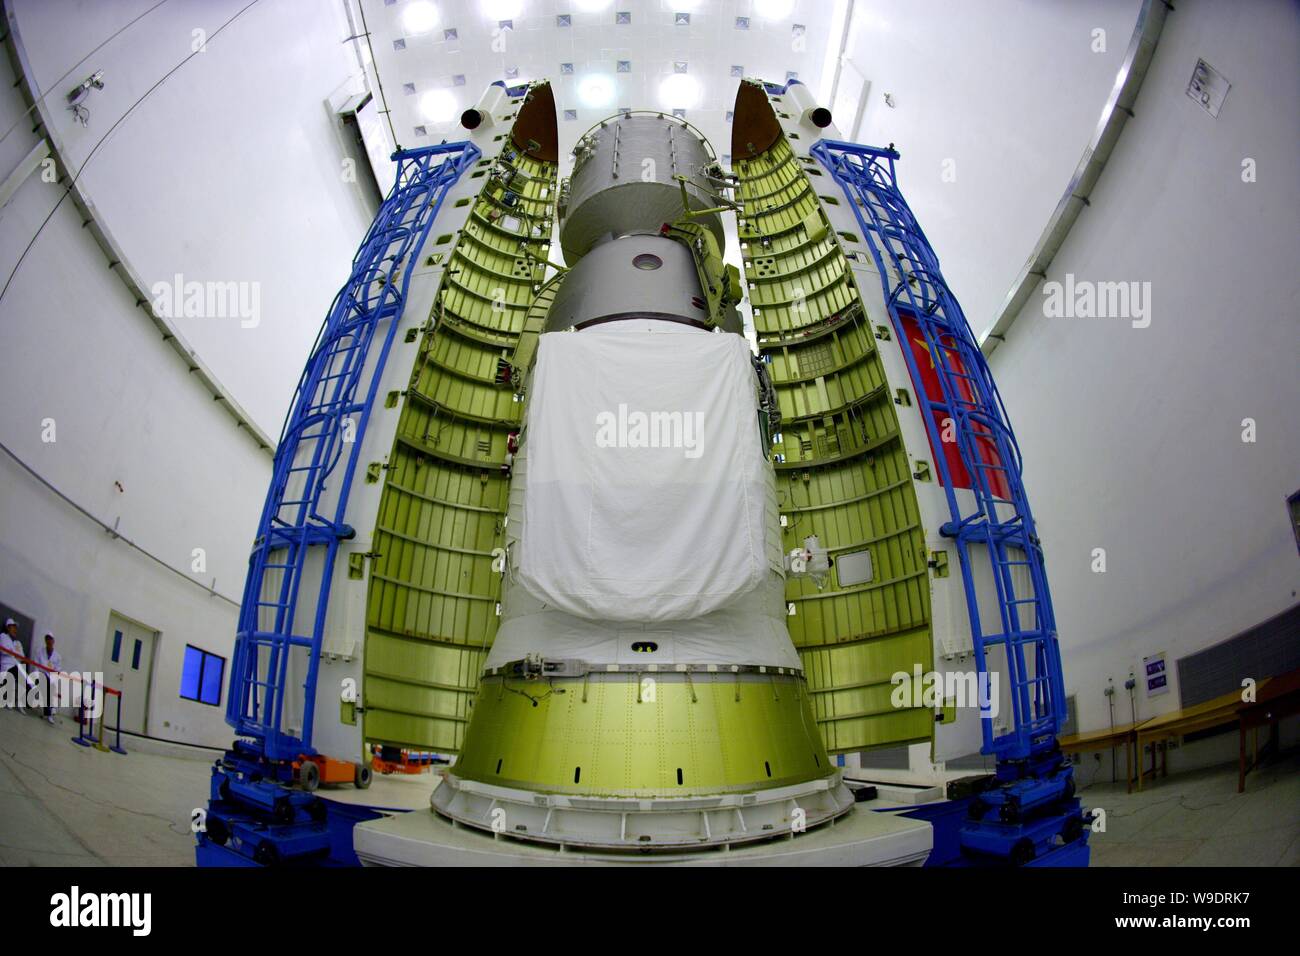 A fairing is seen being installed to cover the Shenzhou VII manned spacecraft at Jiuquan Satellite Launch Center in northwest Chinas Gansu province, 1 Stock Photo